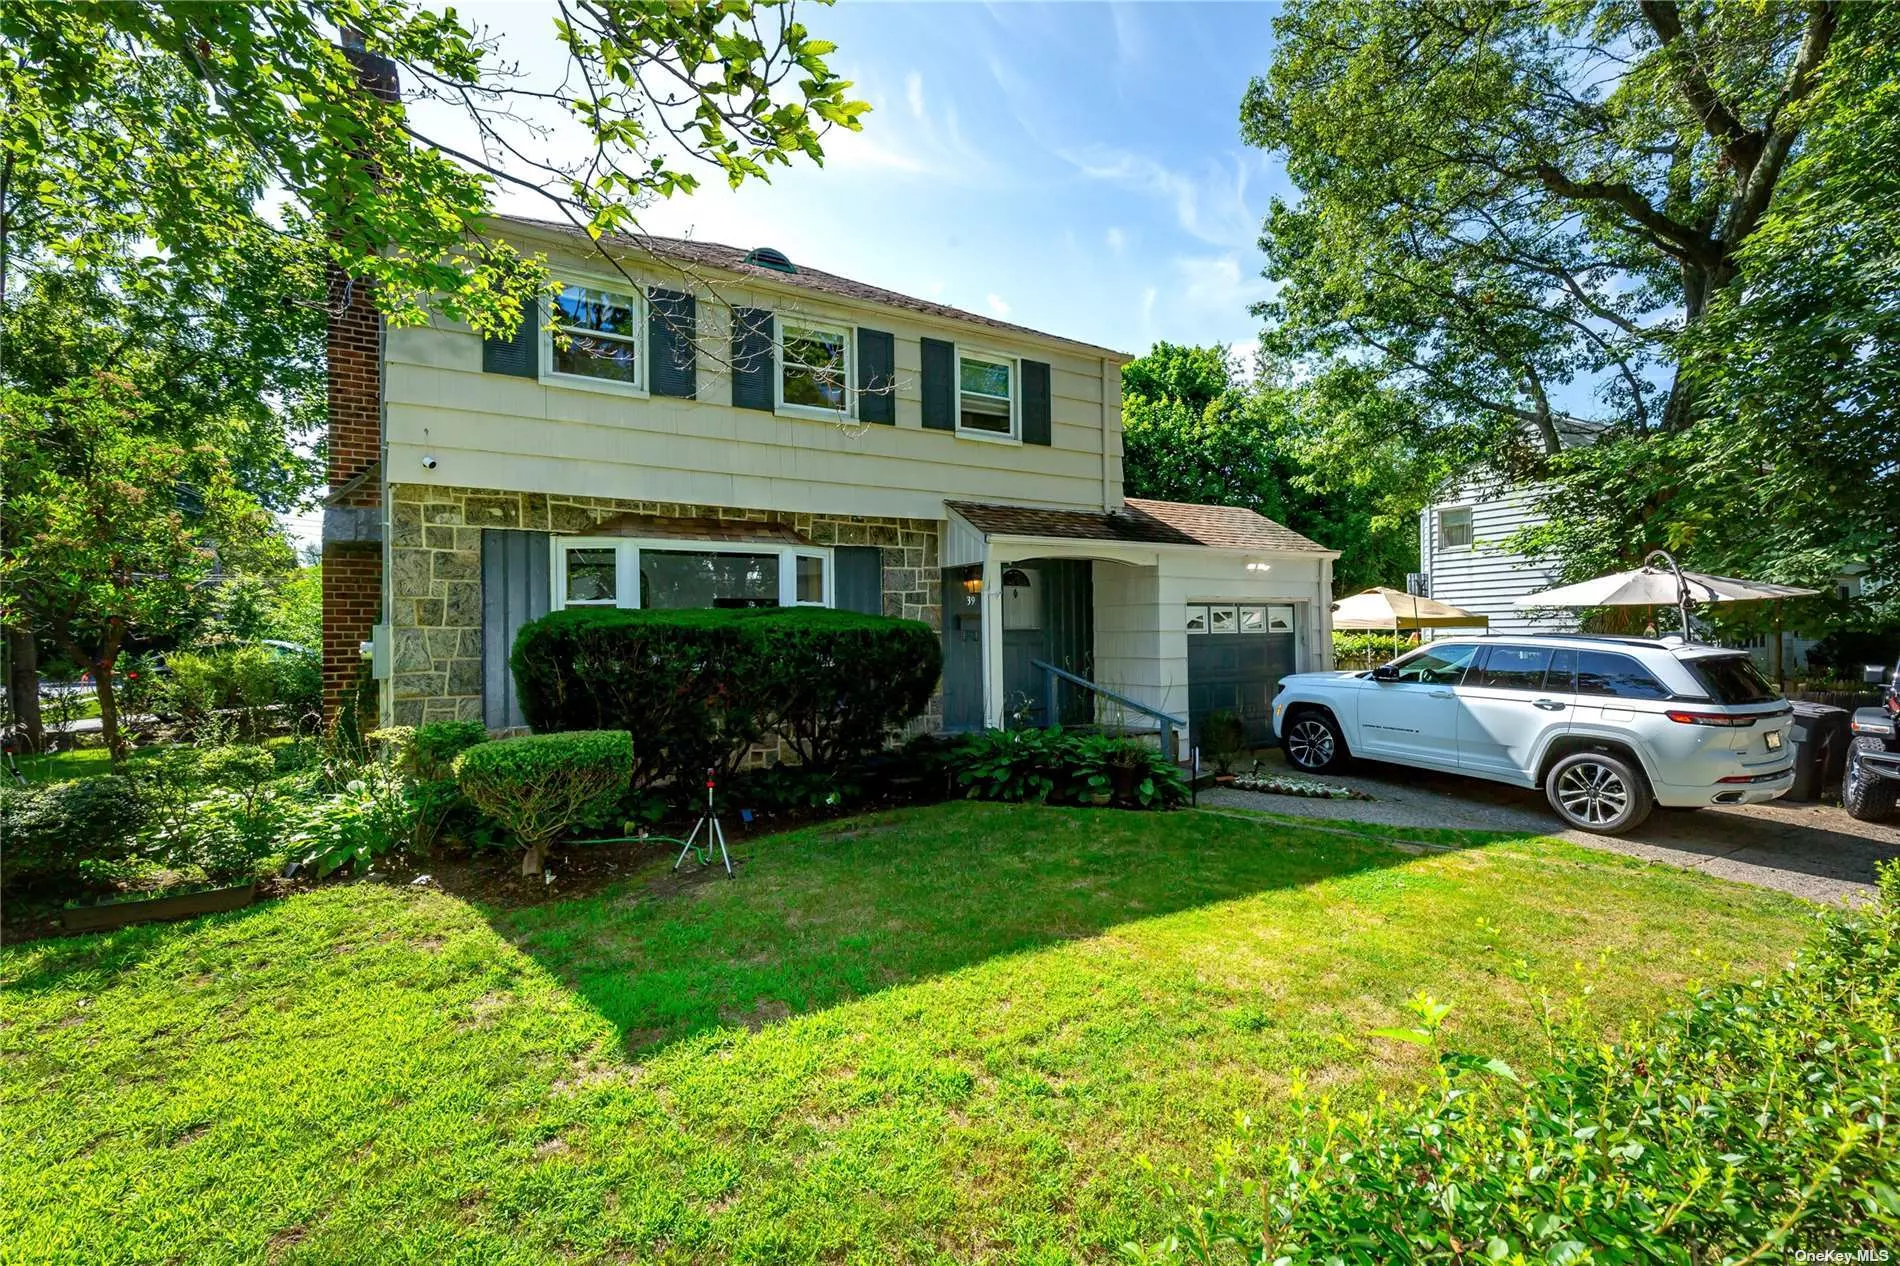 Won&rsquo;t last long! Lowest price on prestigious Kings Point Road, the most sought after location in Great Neck, walking distance to amenities no other community has: one block from Long Island Sound and famous Stepping Store Park with children pool+water park and marina access, resort like Parkway Pool Park, indoor skating rink, indoor and outdoor tennis courts, hiking park, and Great Neck Schools! 3 bedrooms 2 bathrooms 1 attached garage, many recent updates, plus a bonus bedroom in the basement, large corner lot. It&rsquo;s ready for a family with high quality living in mind. This property offers significant potential for expansion. There is the opportunity to easily add an additional about1000-1500 square feet by extending both next to and above the garage.